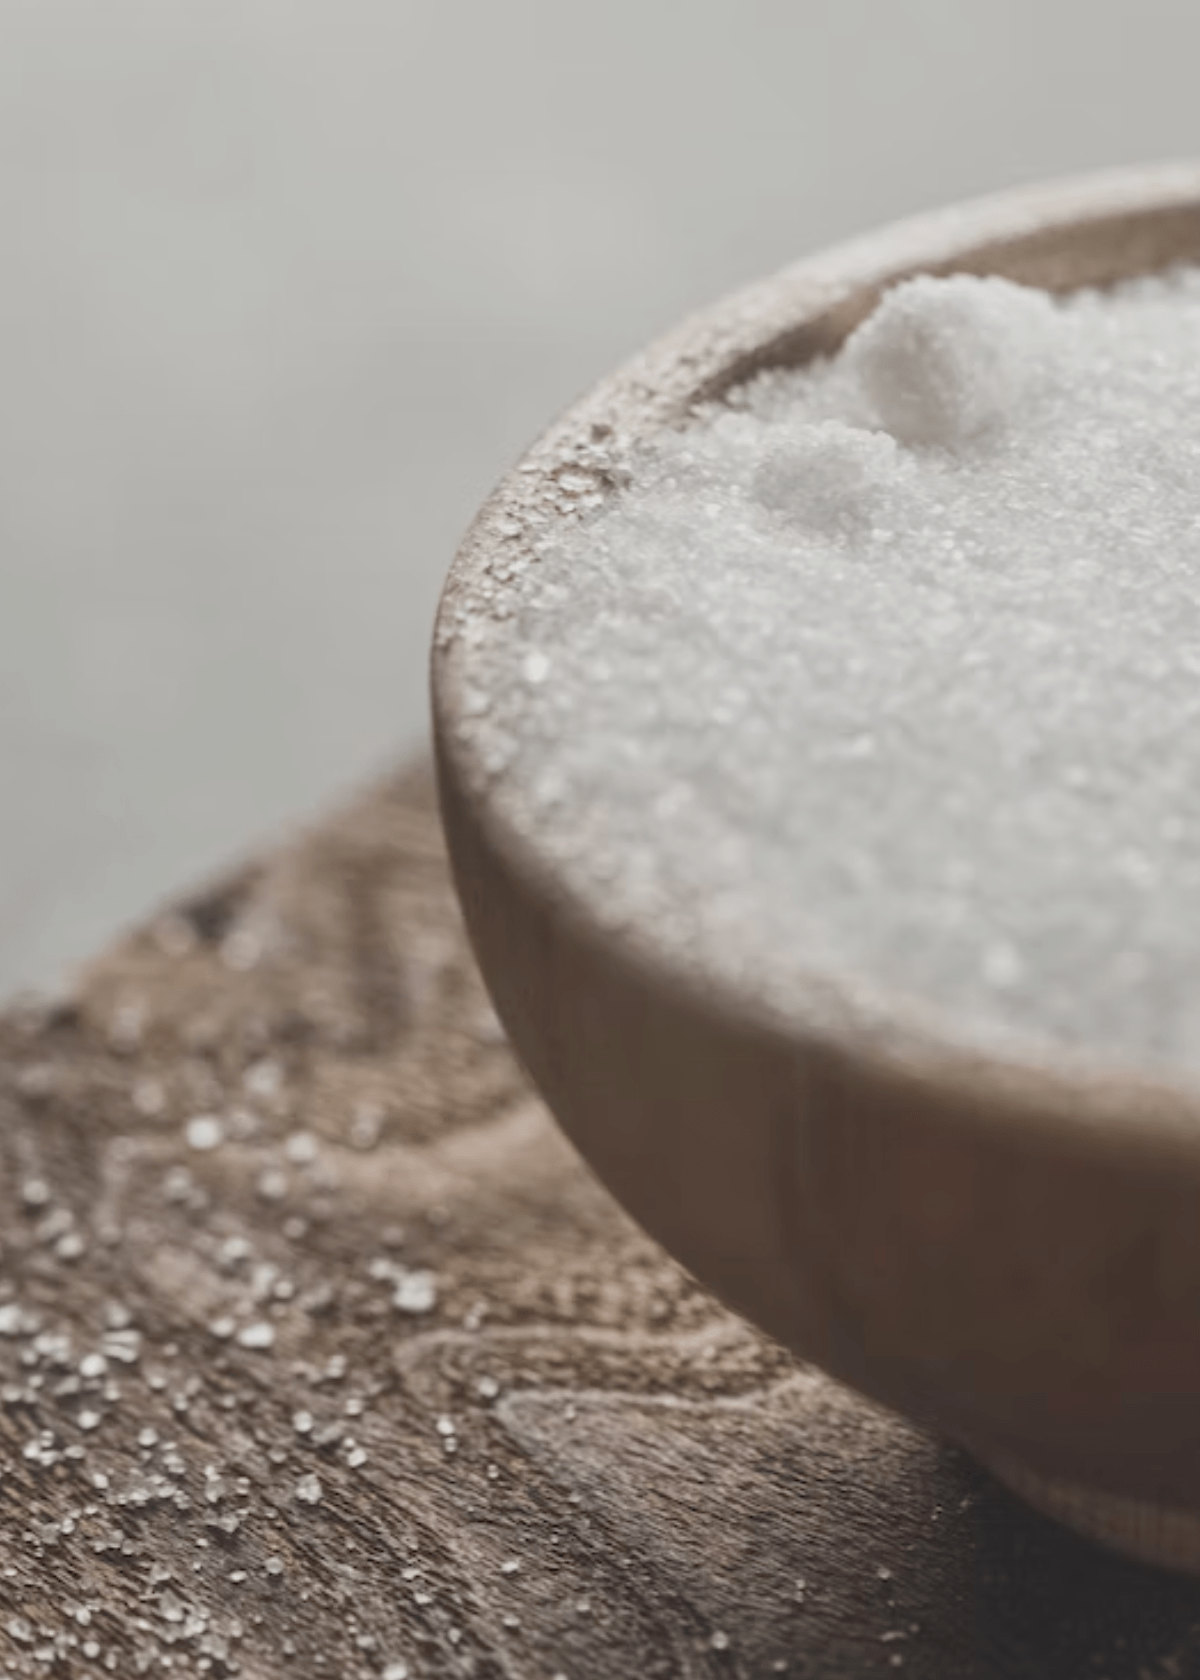 The Difference Between Kosher Salt and Table Salt